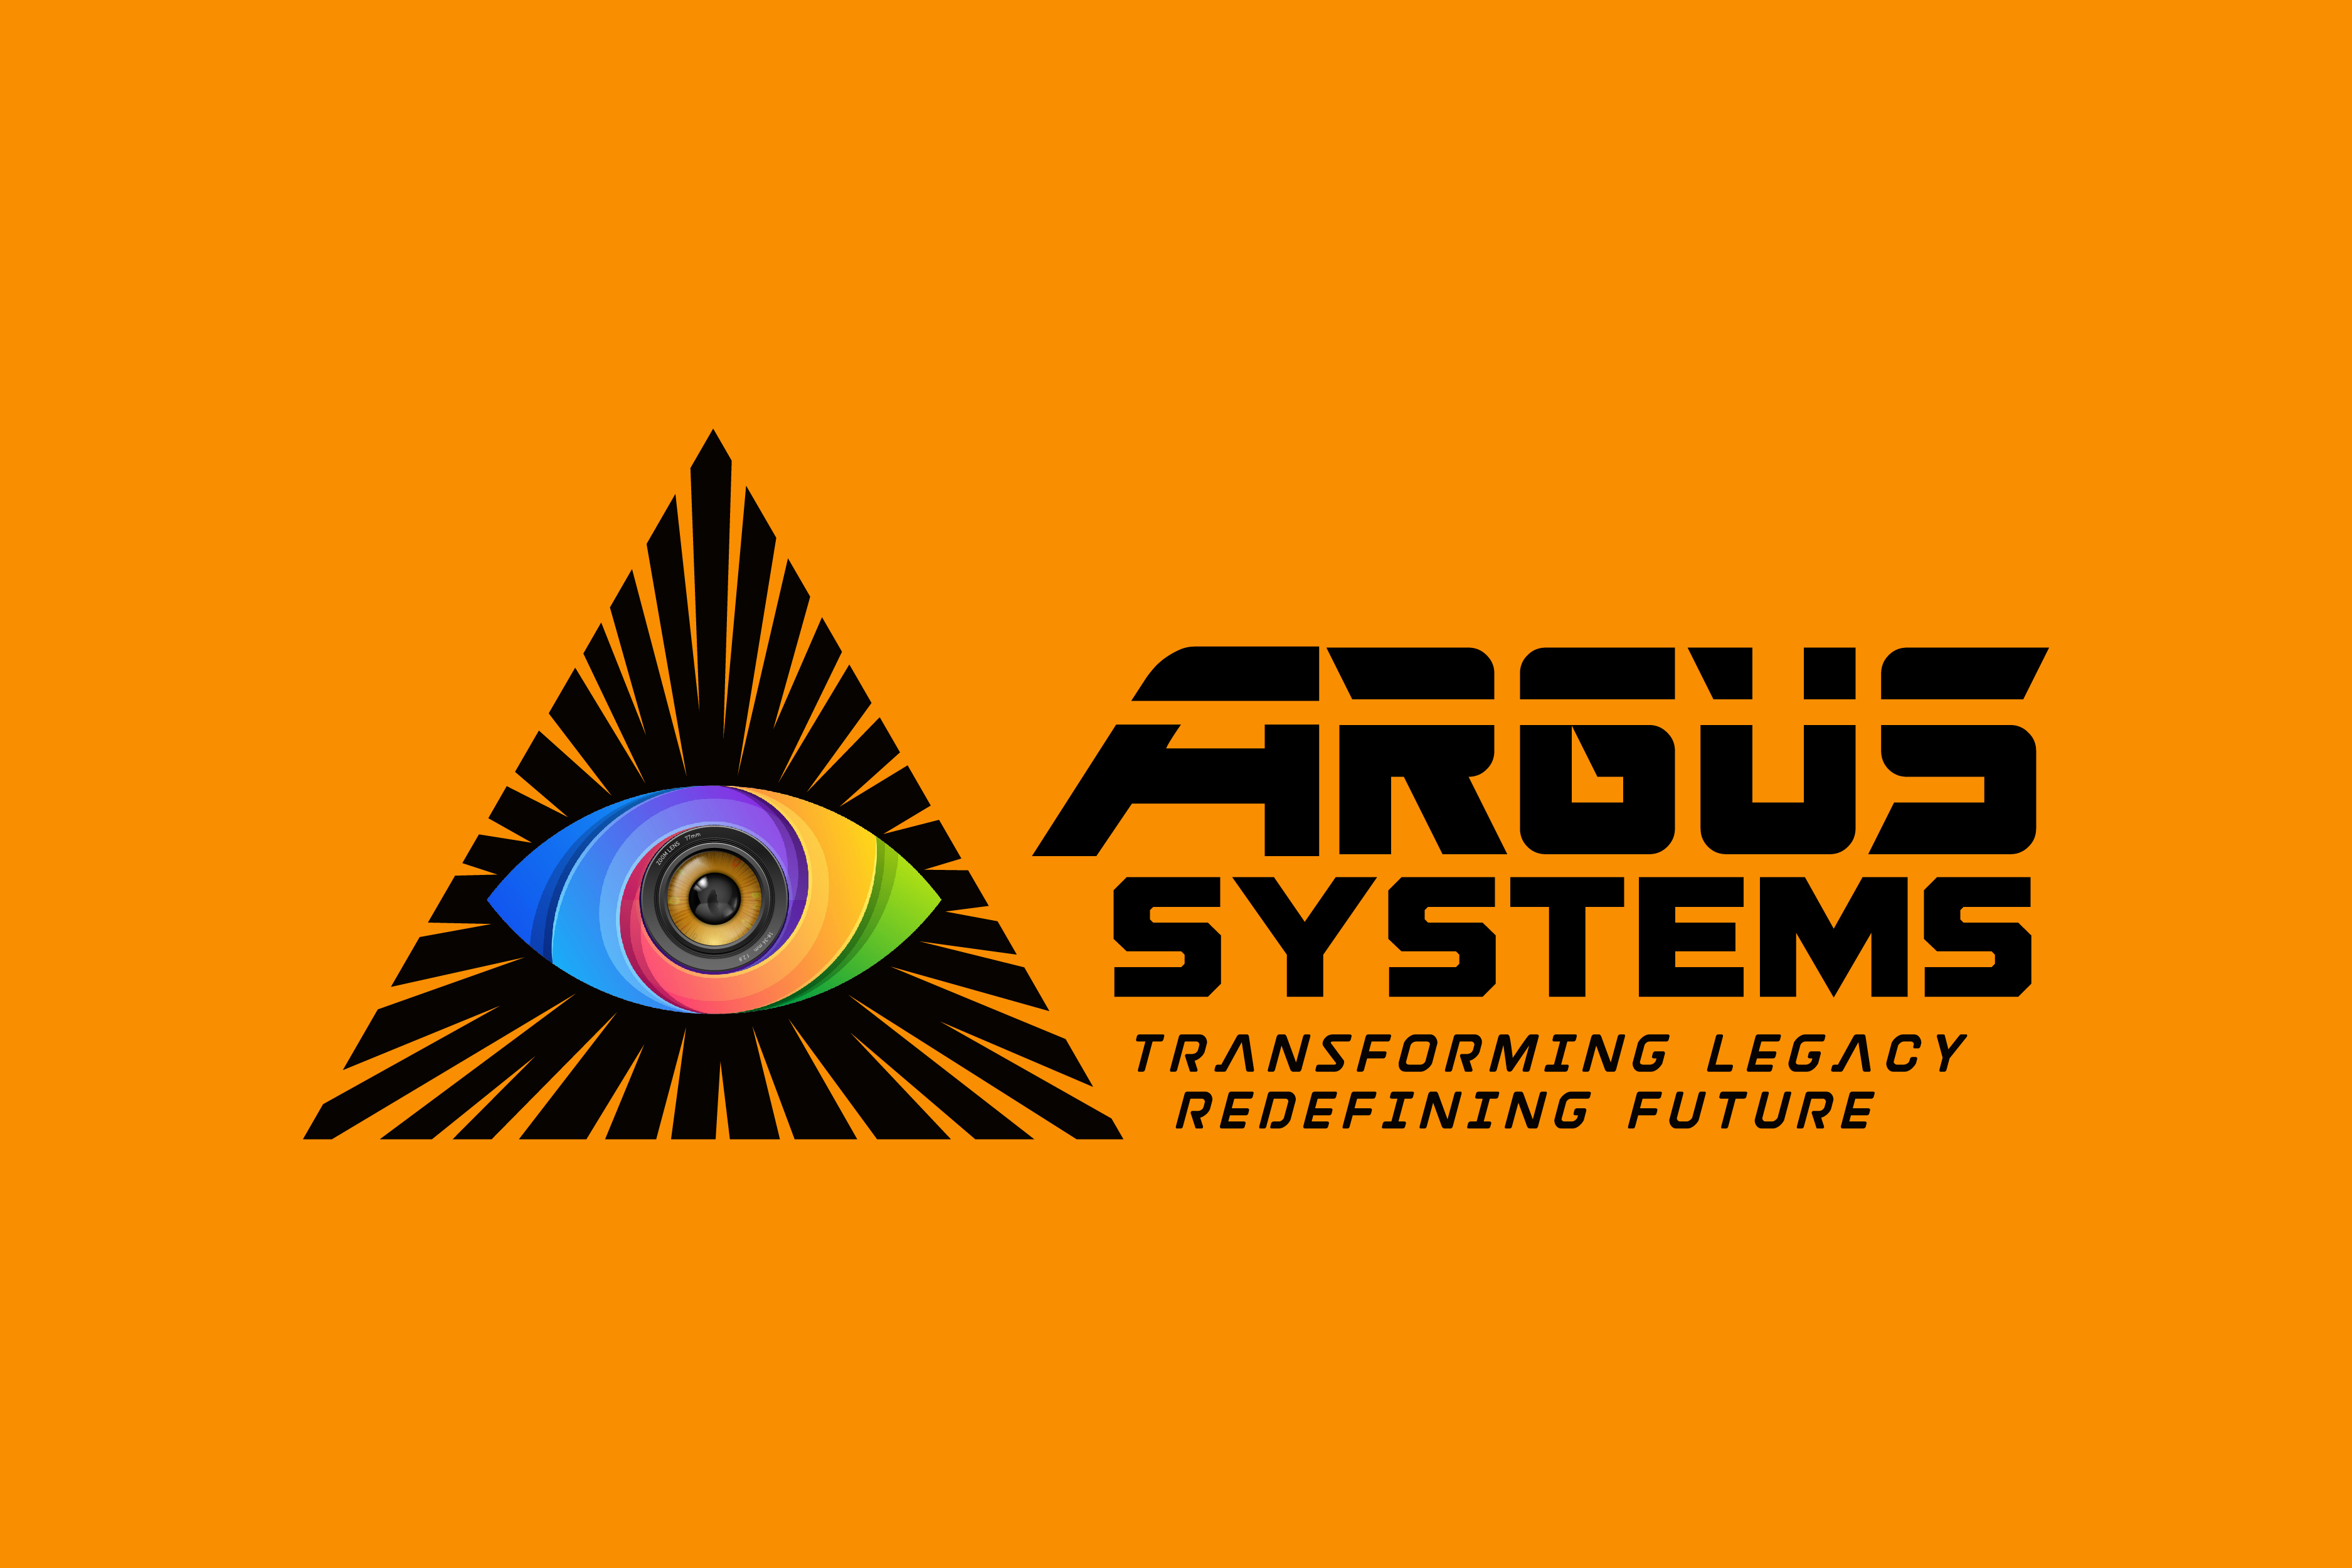 Argus Systems Transforming Legacy Redefining Future